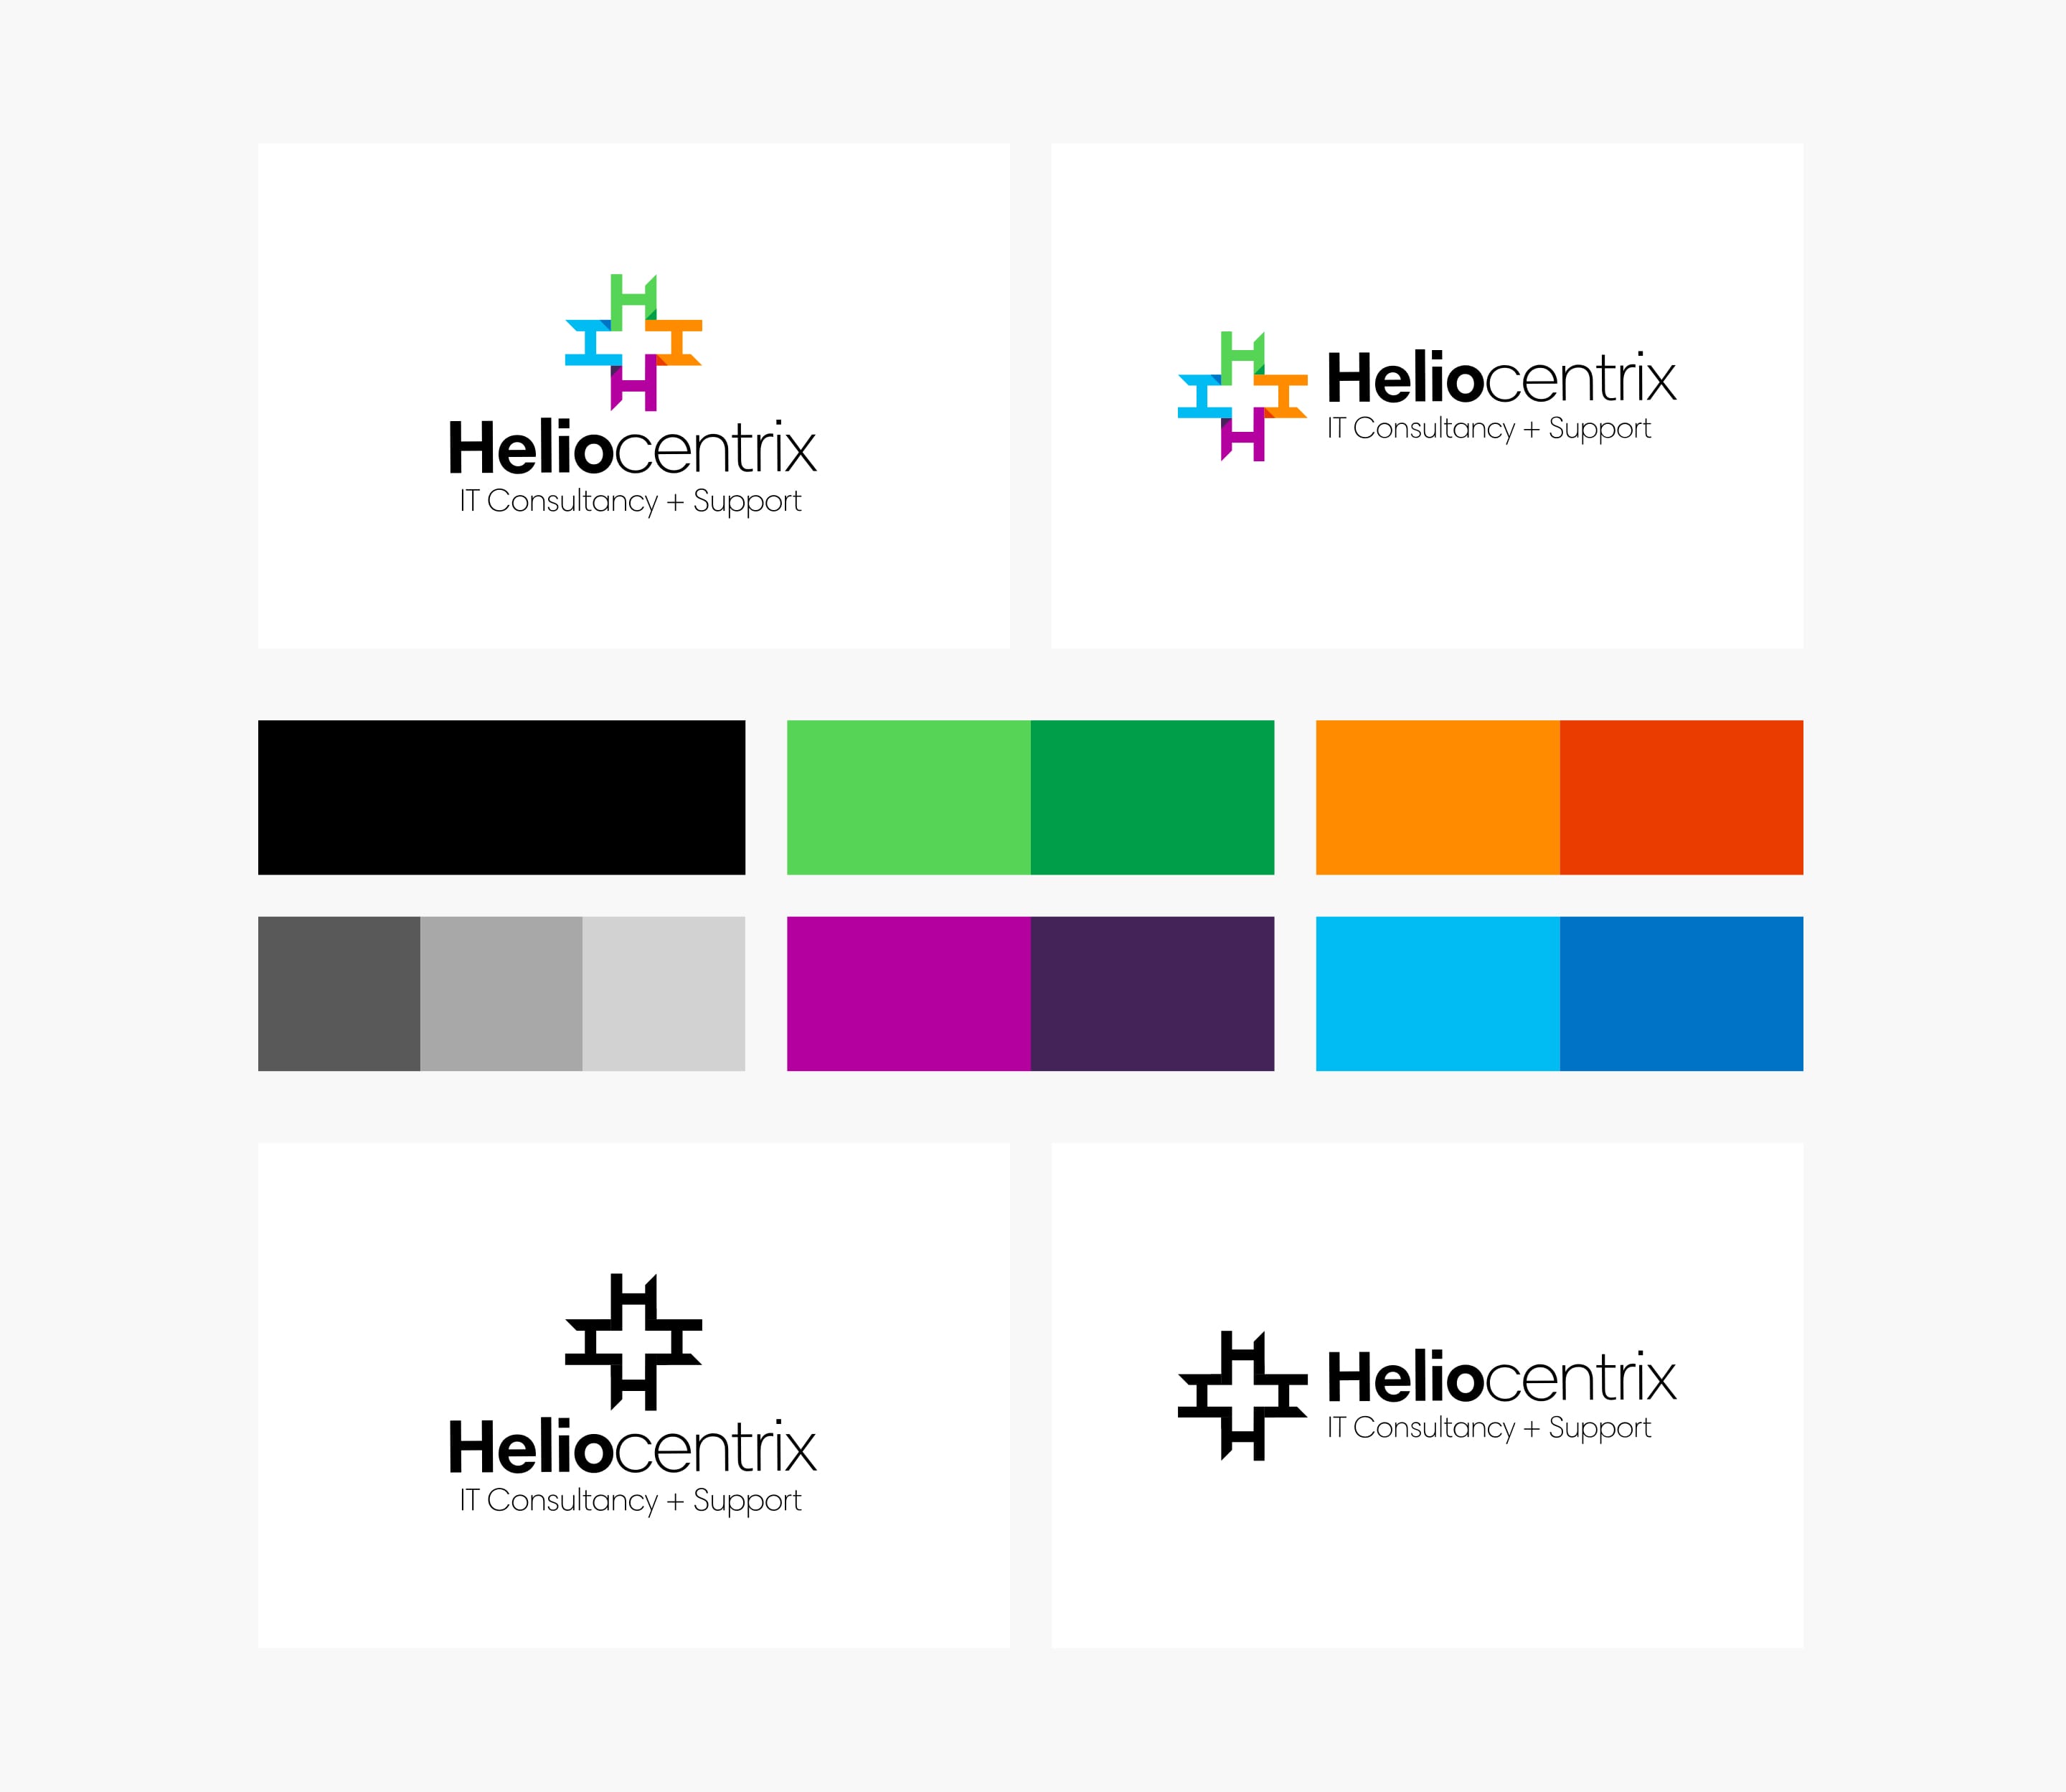 Heliocentrix brand guidelines